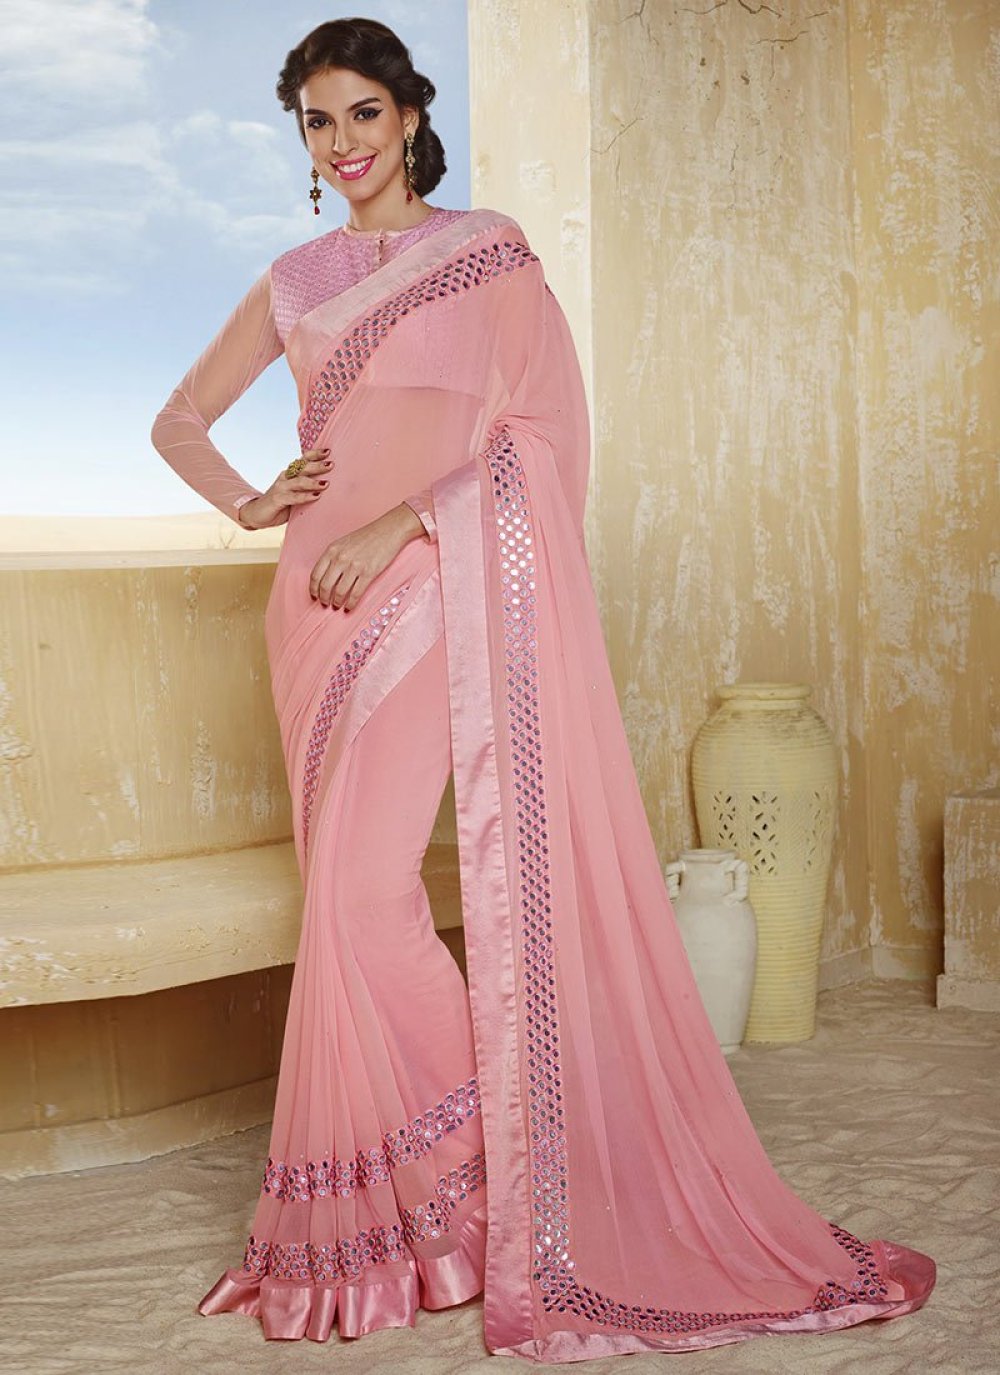 Fancy Pink Sarees for Parties of all Types